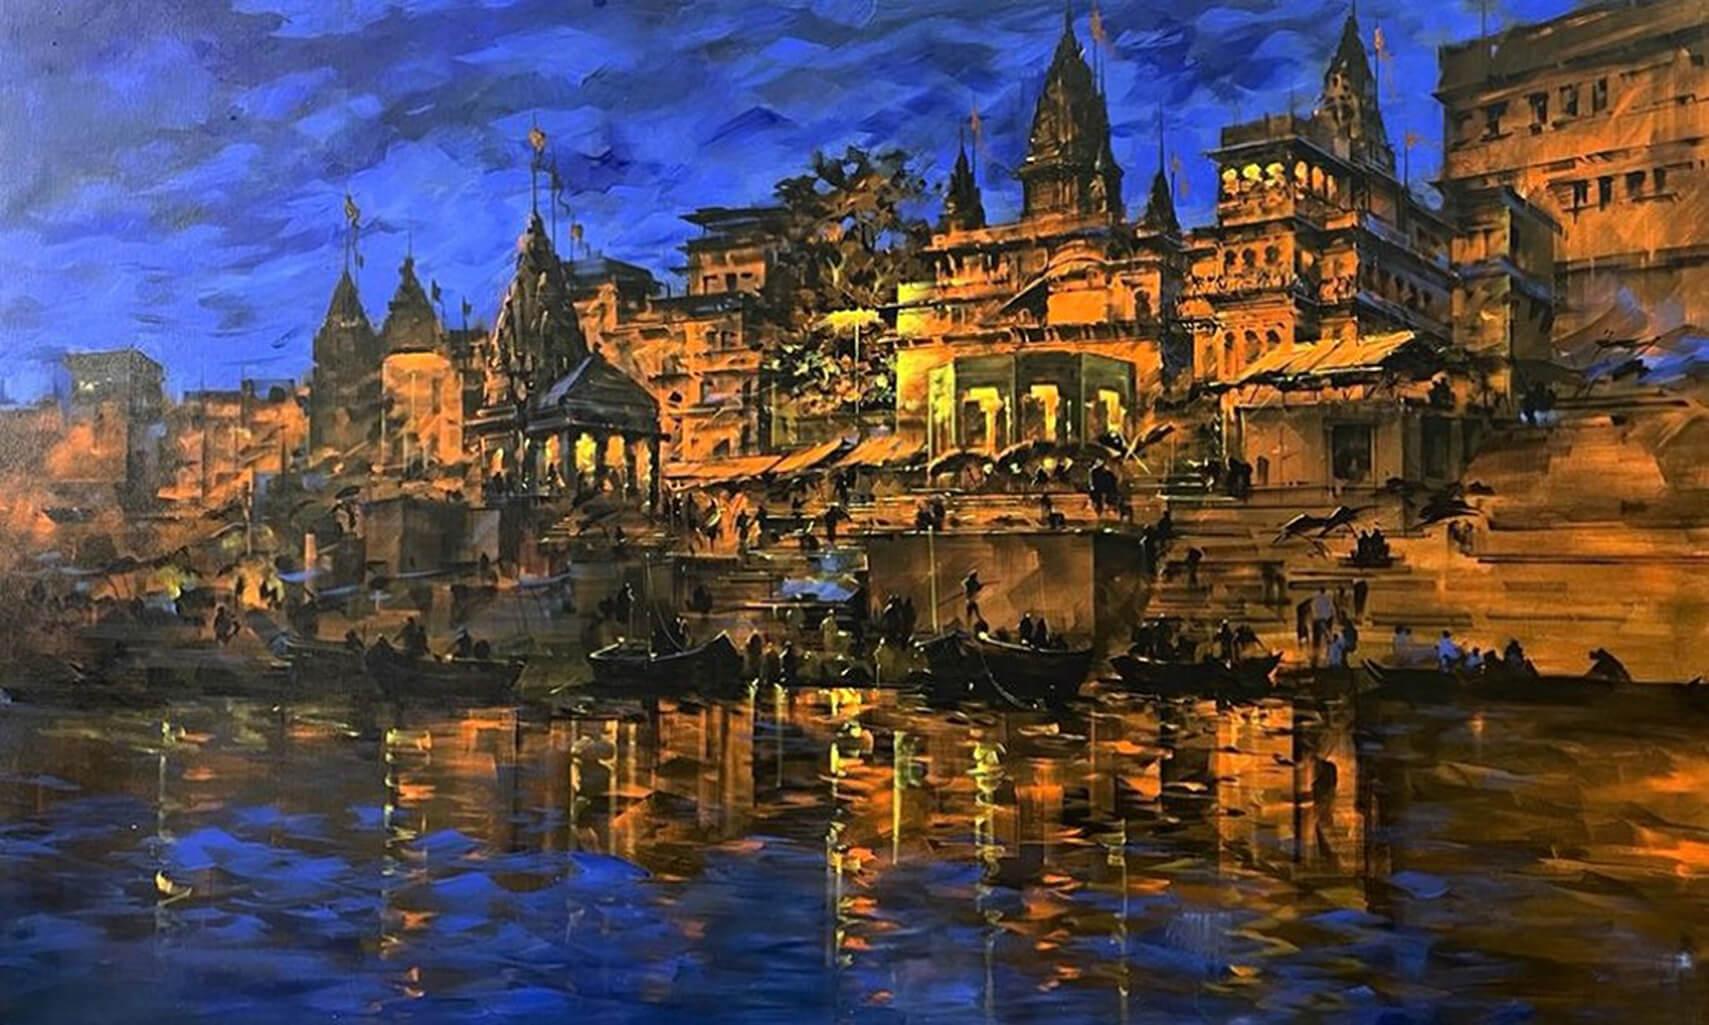 Sandeep Chhatraband Figurative Painting - Cityscape, Acrylic on Canvas by Contemporary Indian Artist "In Stock"